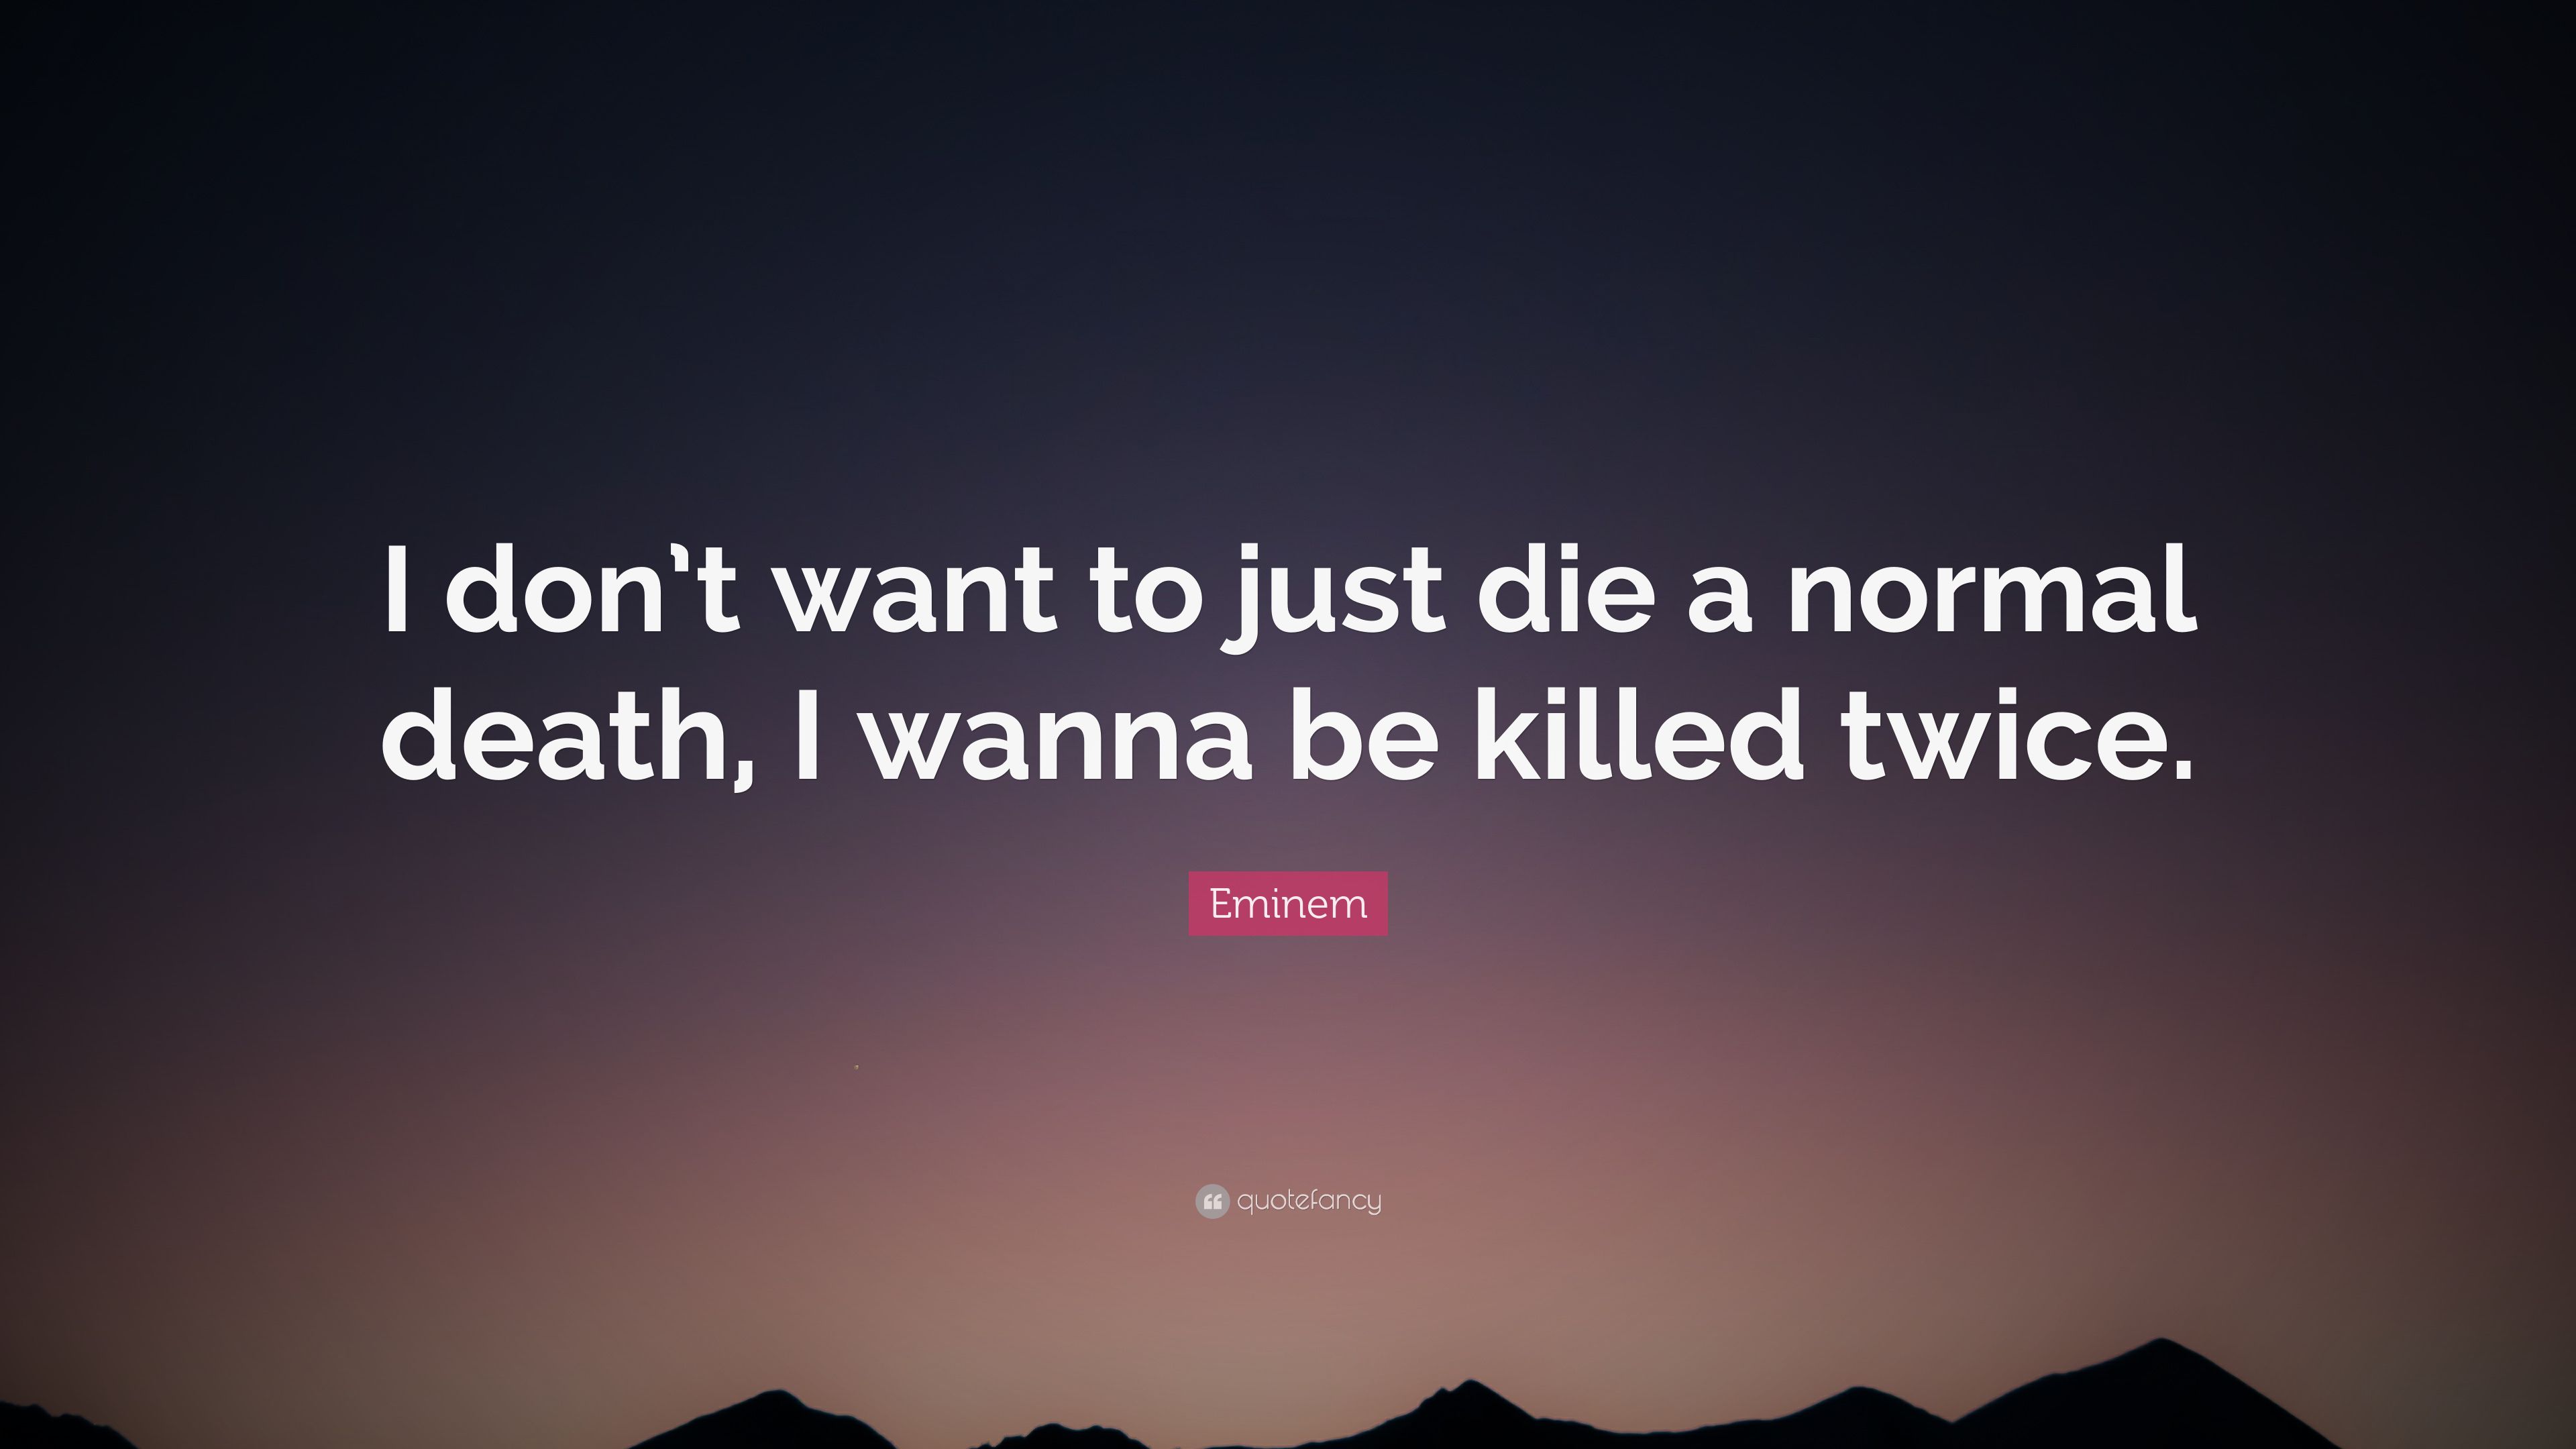 Eminem Quote: “I don't want to just die a normal death, I wanna be